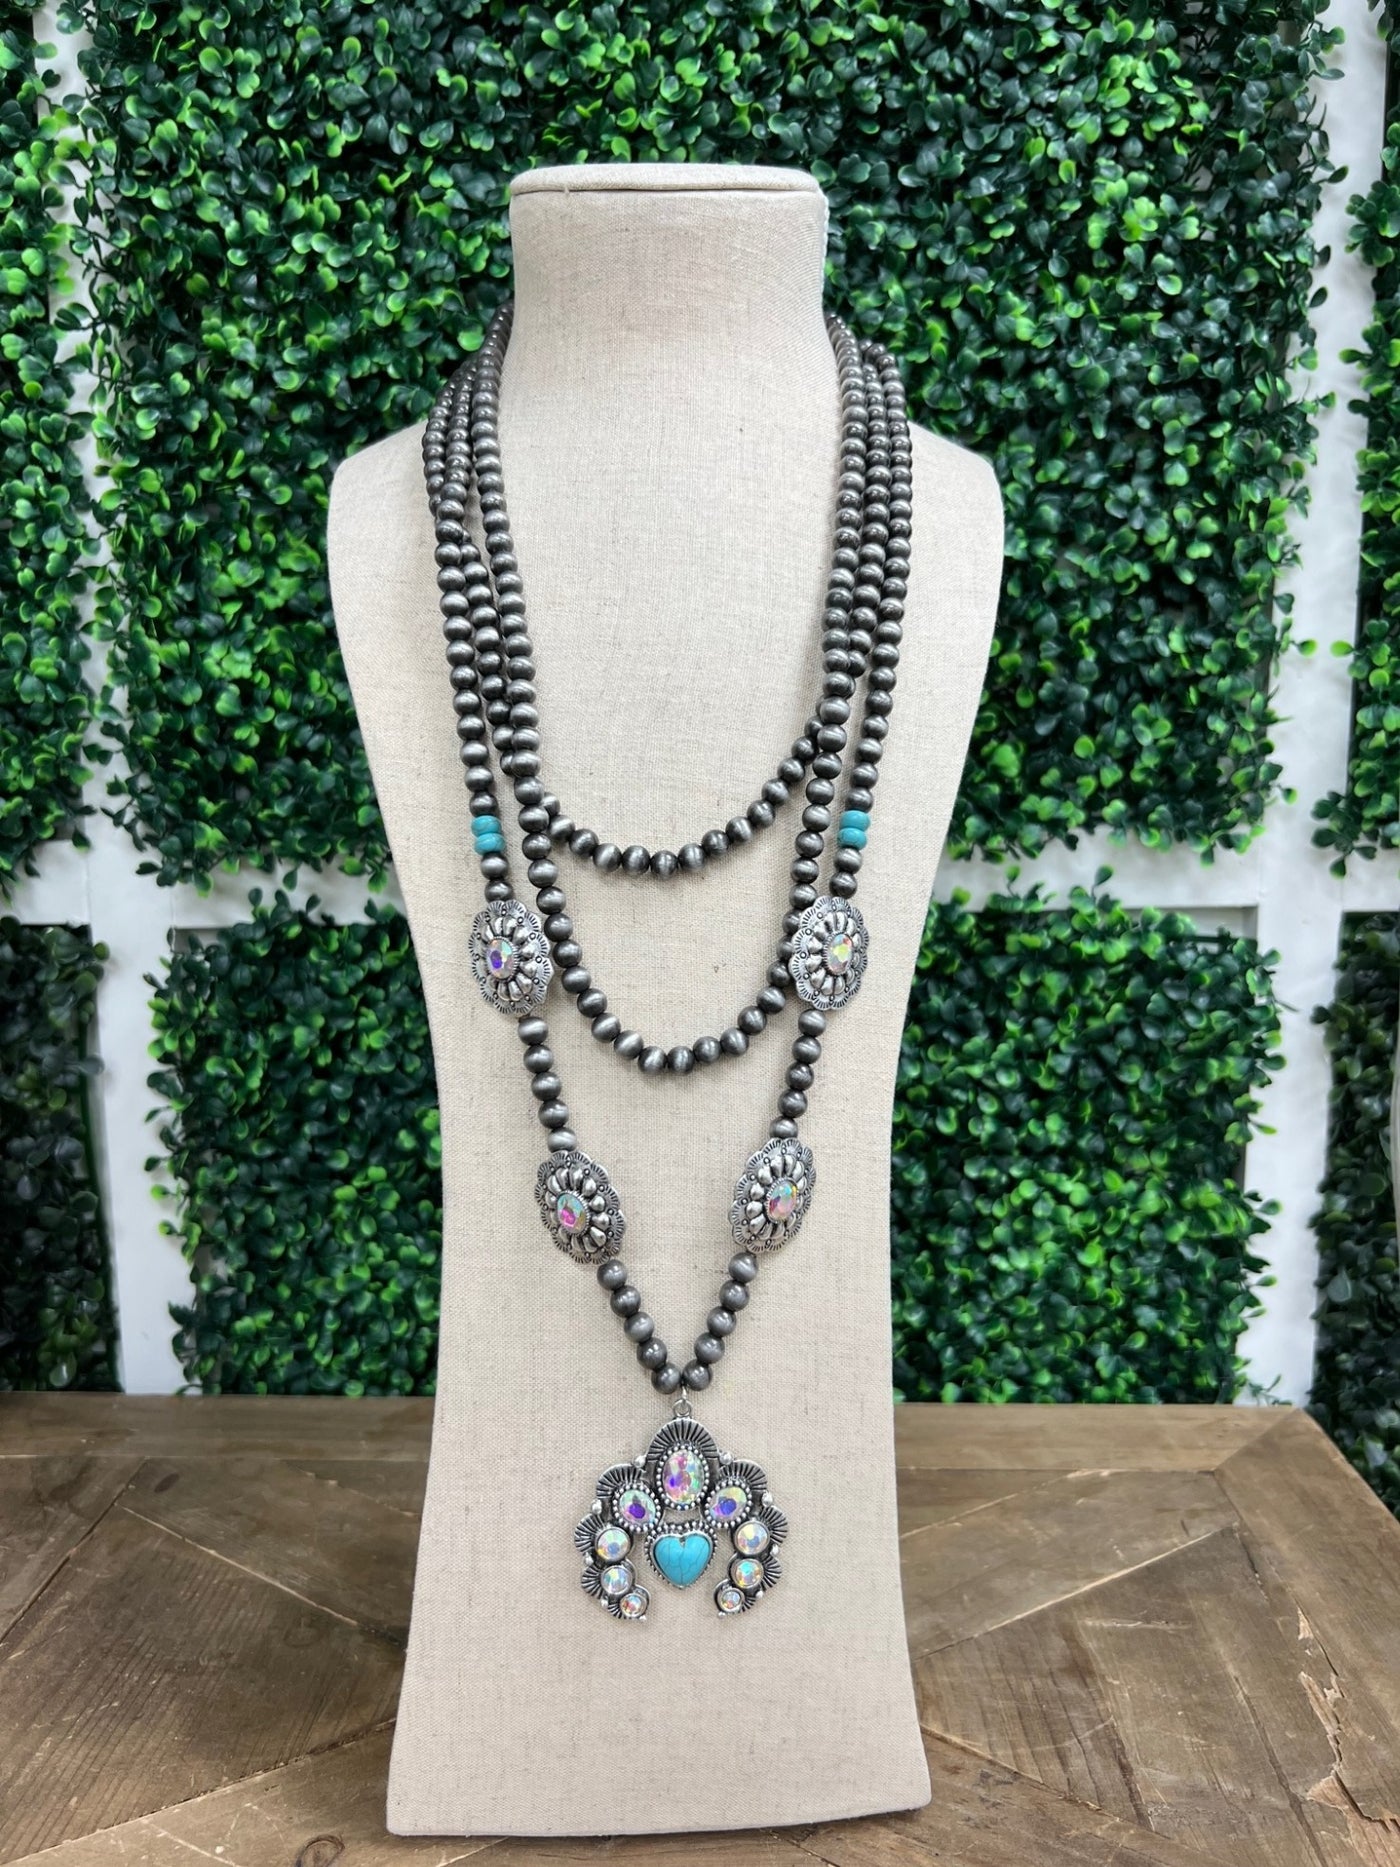 Charcoal Beads Necklace with Silver Turquoise Heart Center Pendant